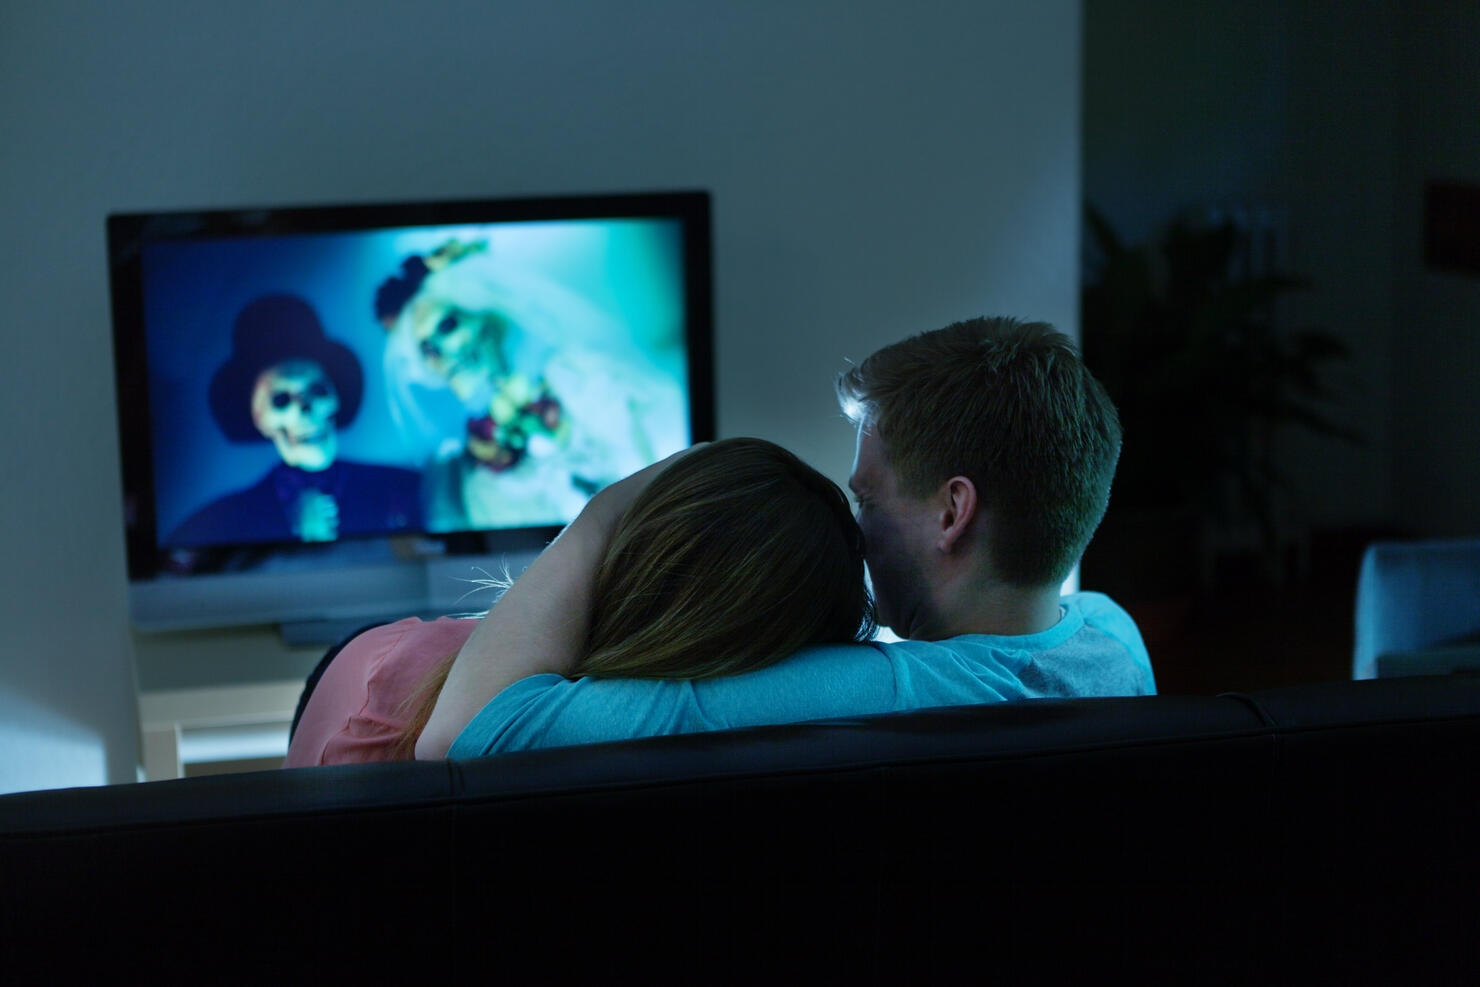 Couple Watching Scary Halloween Movie Together on TV